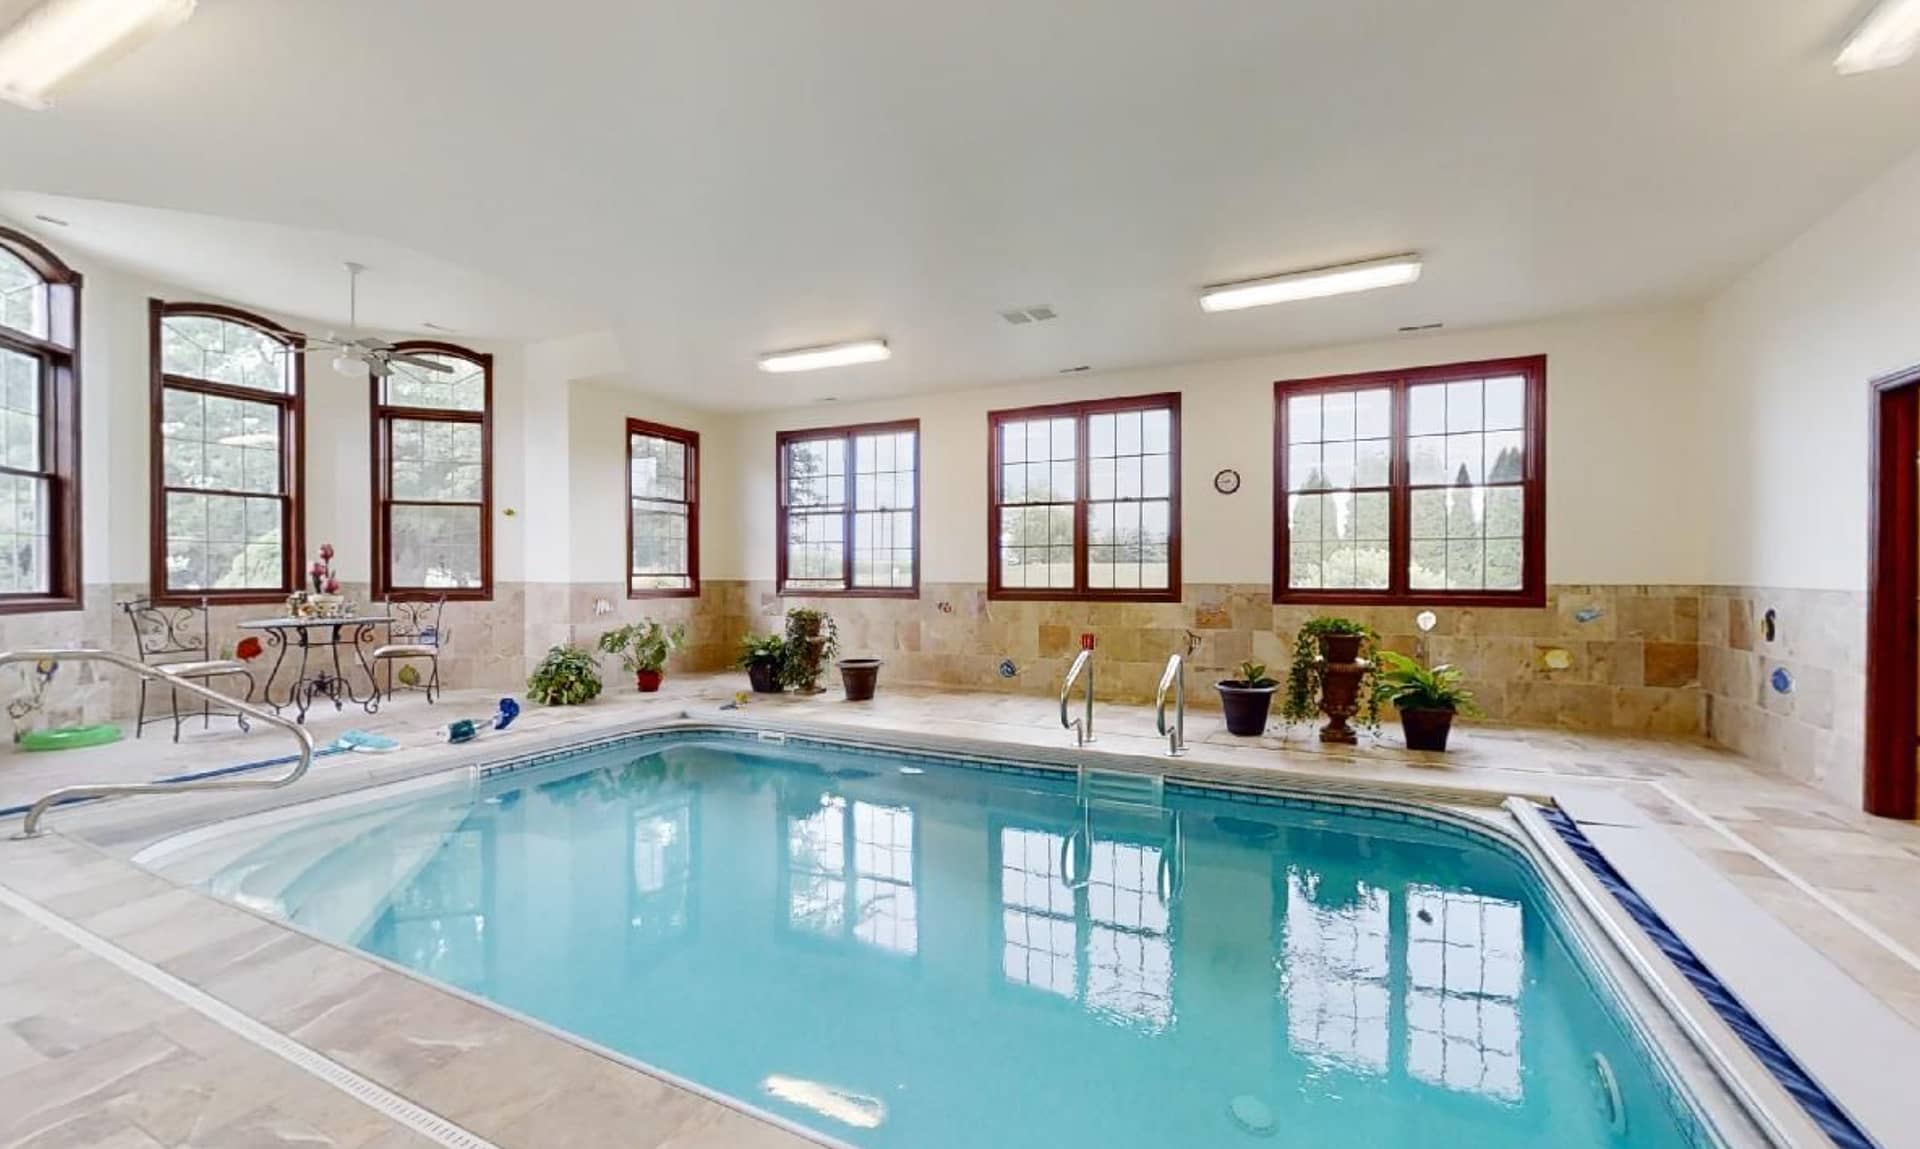 Brick & Stone Home In Illinois With Indoor Pool (PHOTOS)